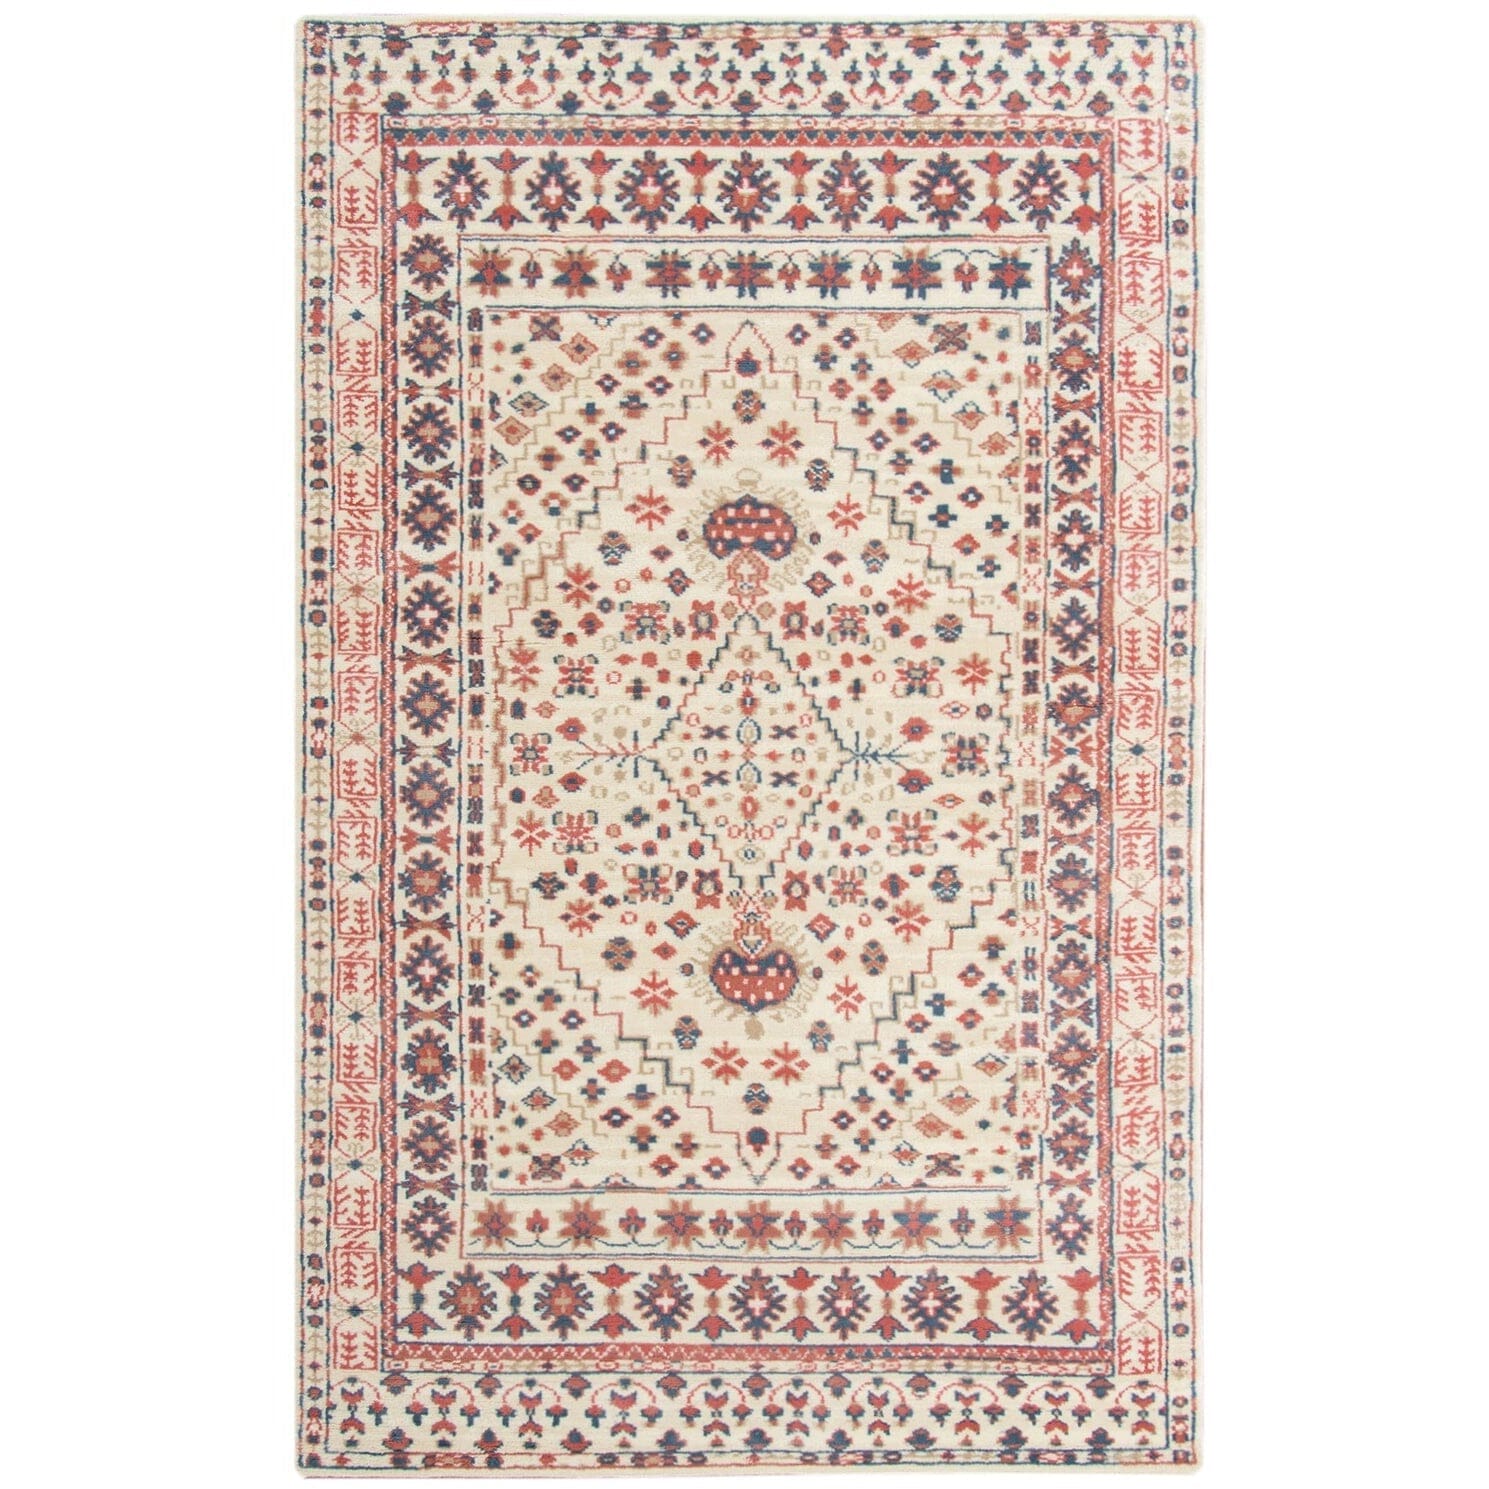 Lily Pink Wool Handknotted Pink Rugs Organic Weave Shop 6x9 